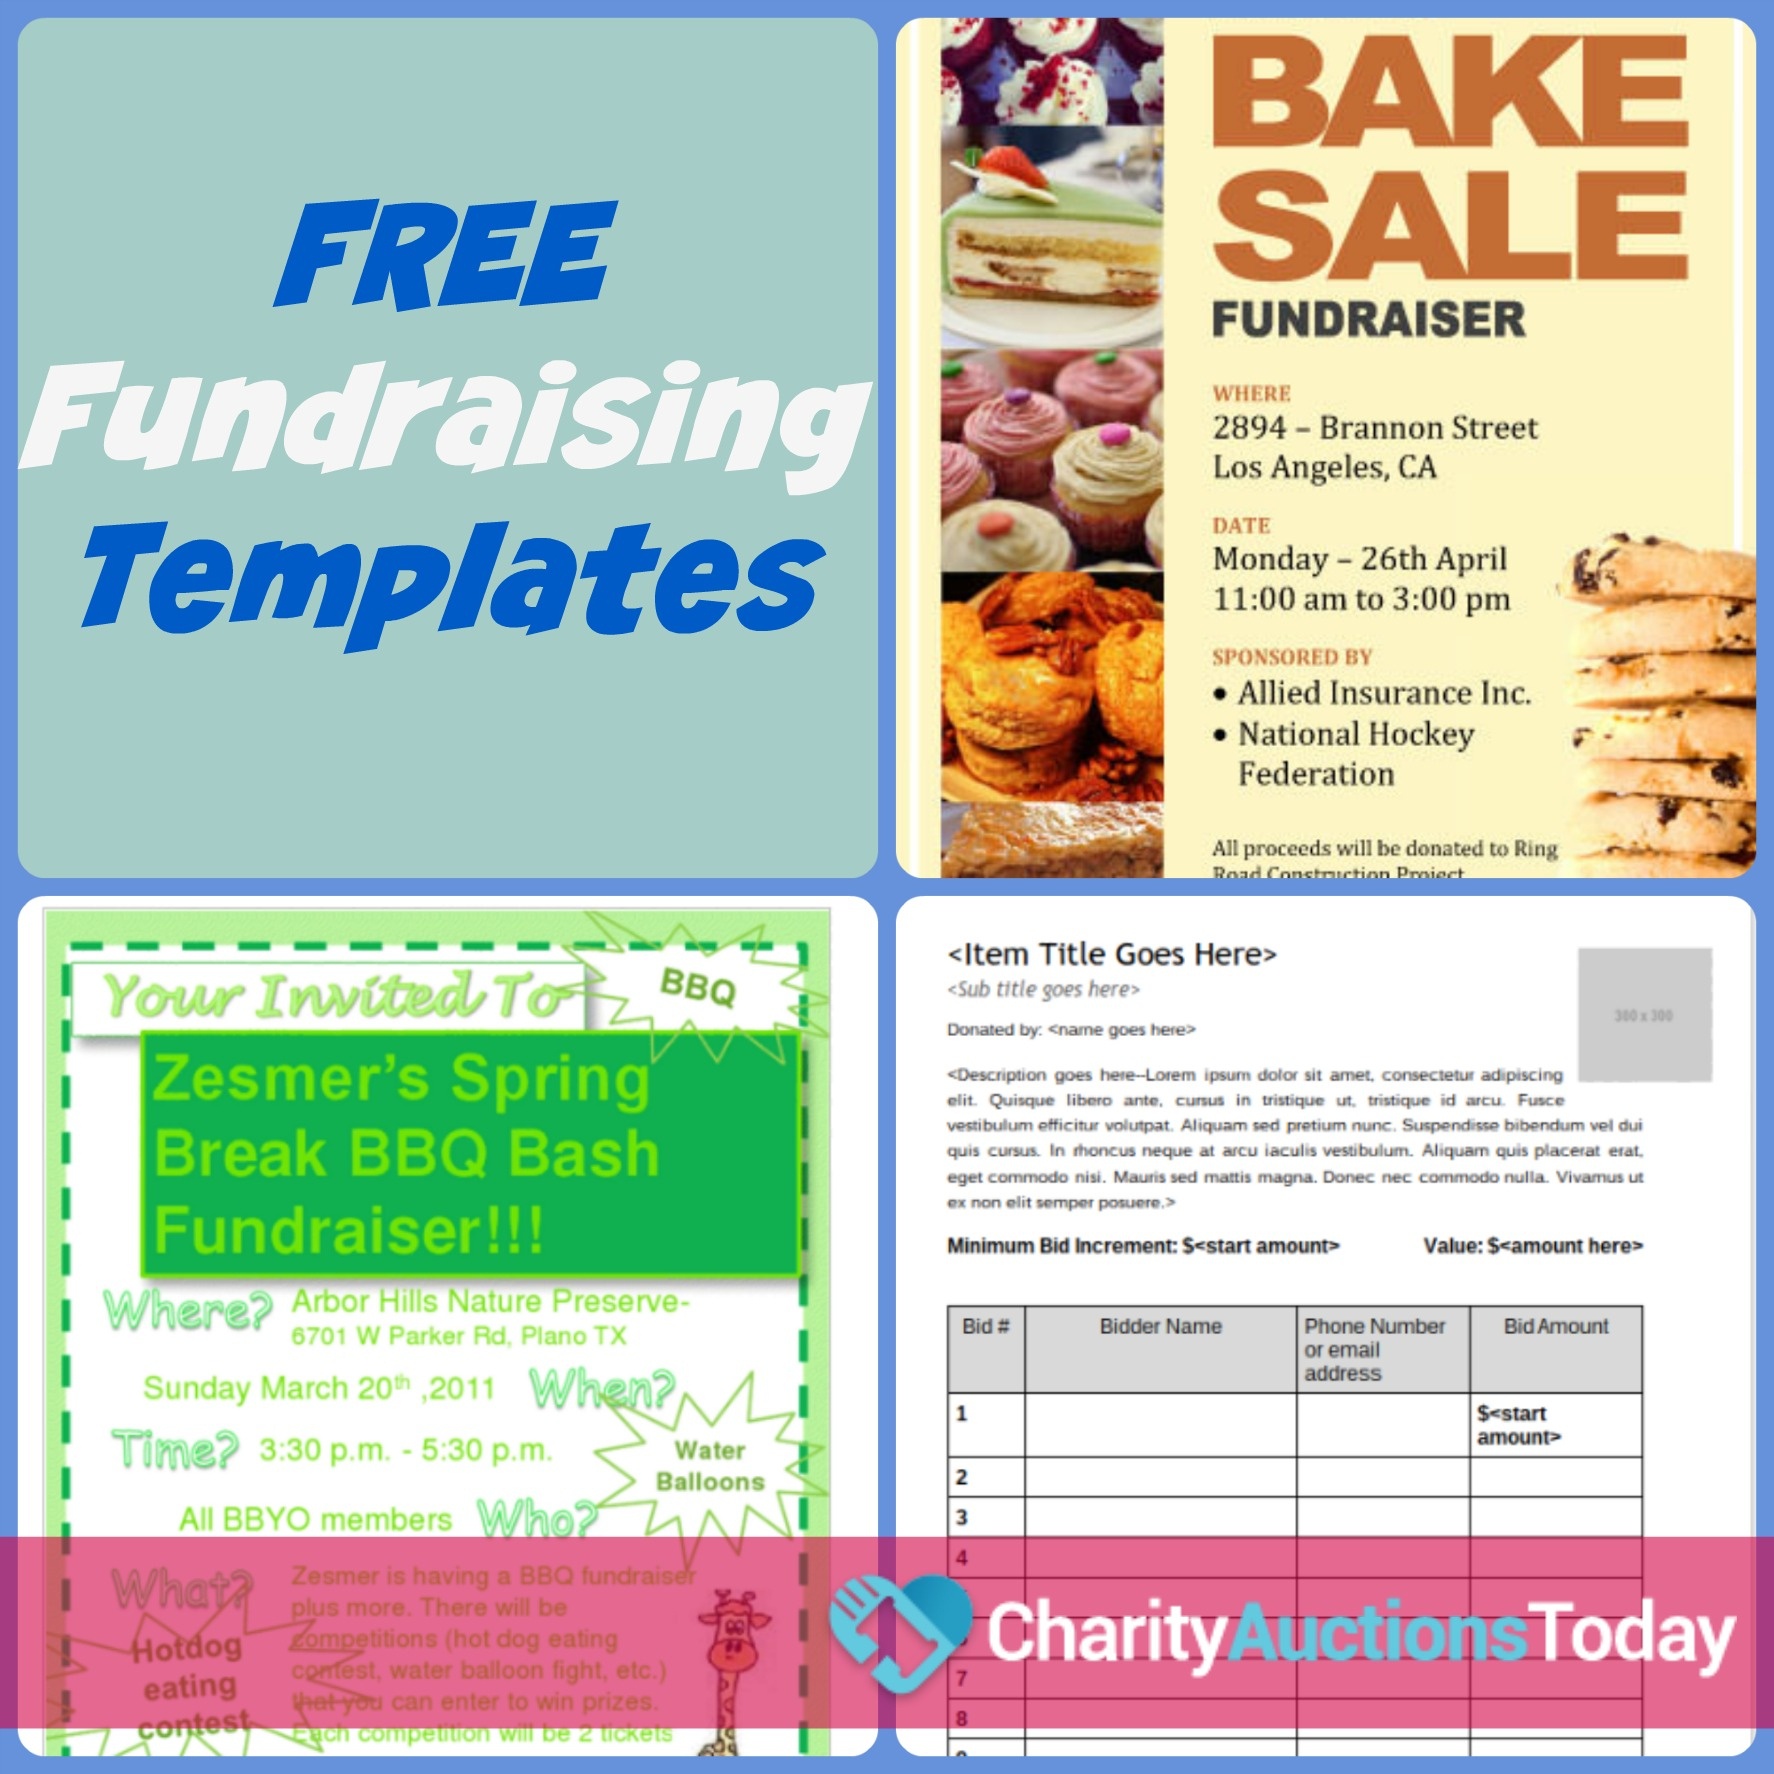 Free Fundraiser Flyer | Charity Auctions Today - Free Printable Fundraiser Flyer Templates